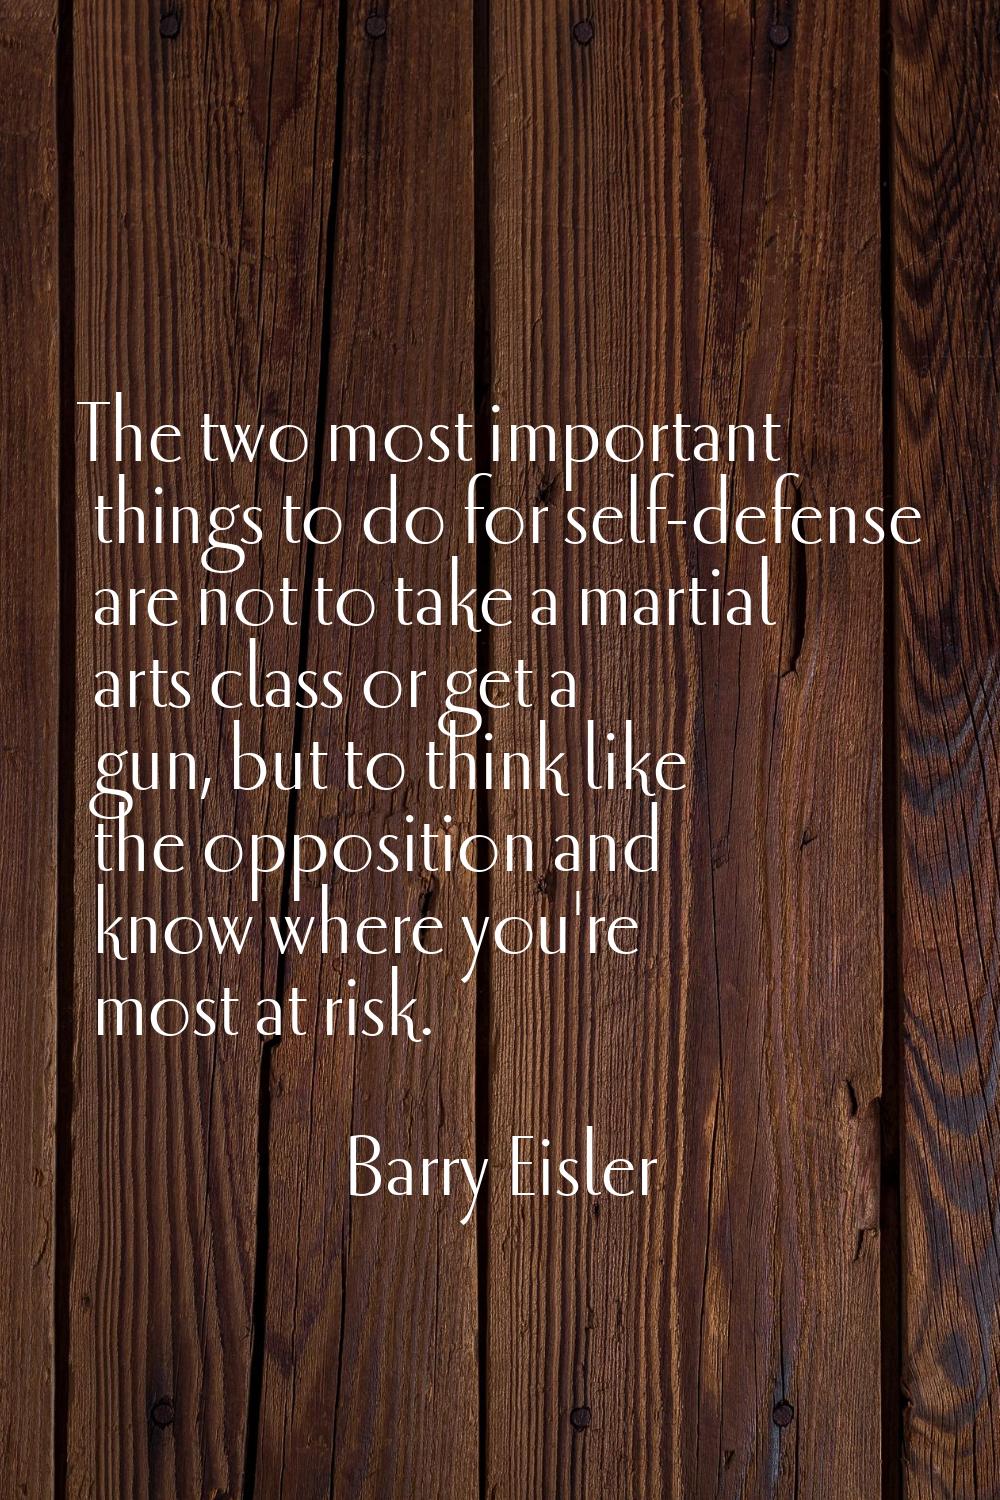 The two most important things to do for self-defense are not to take a martial arts class or get a 